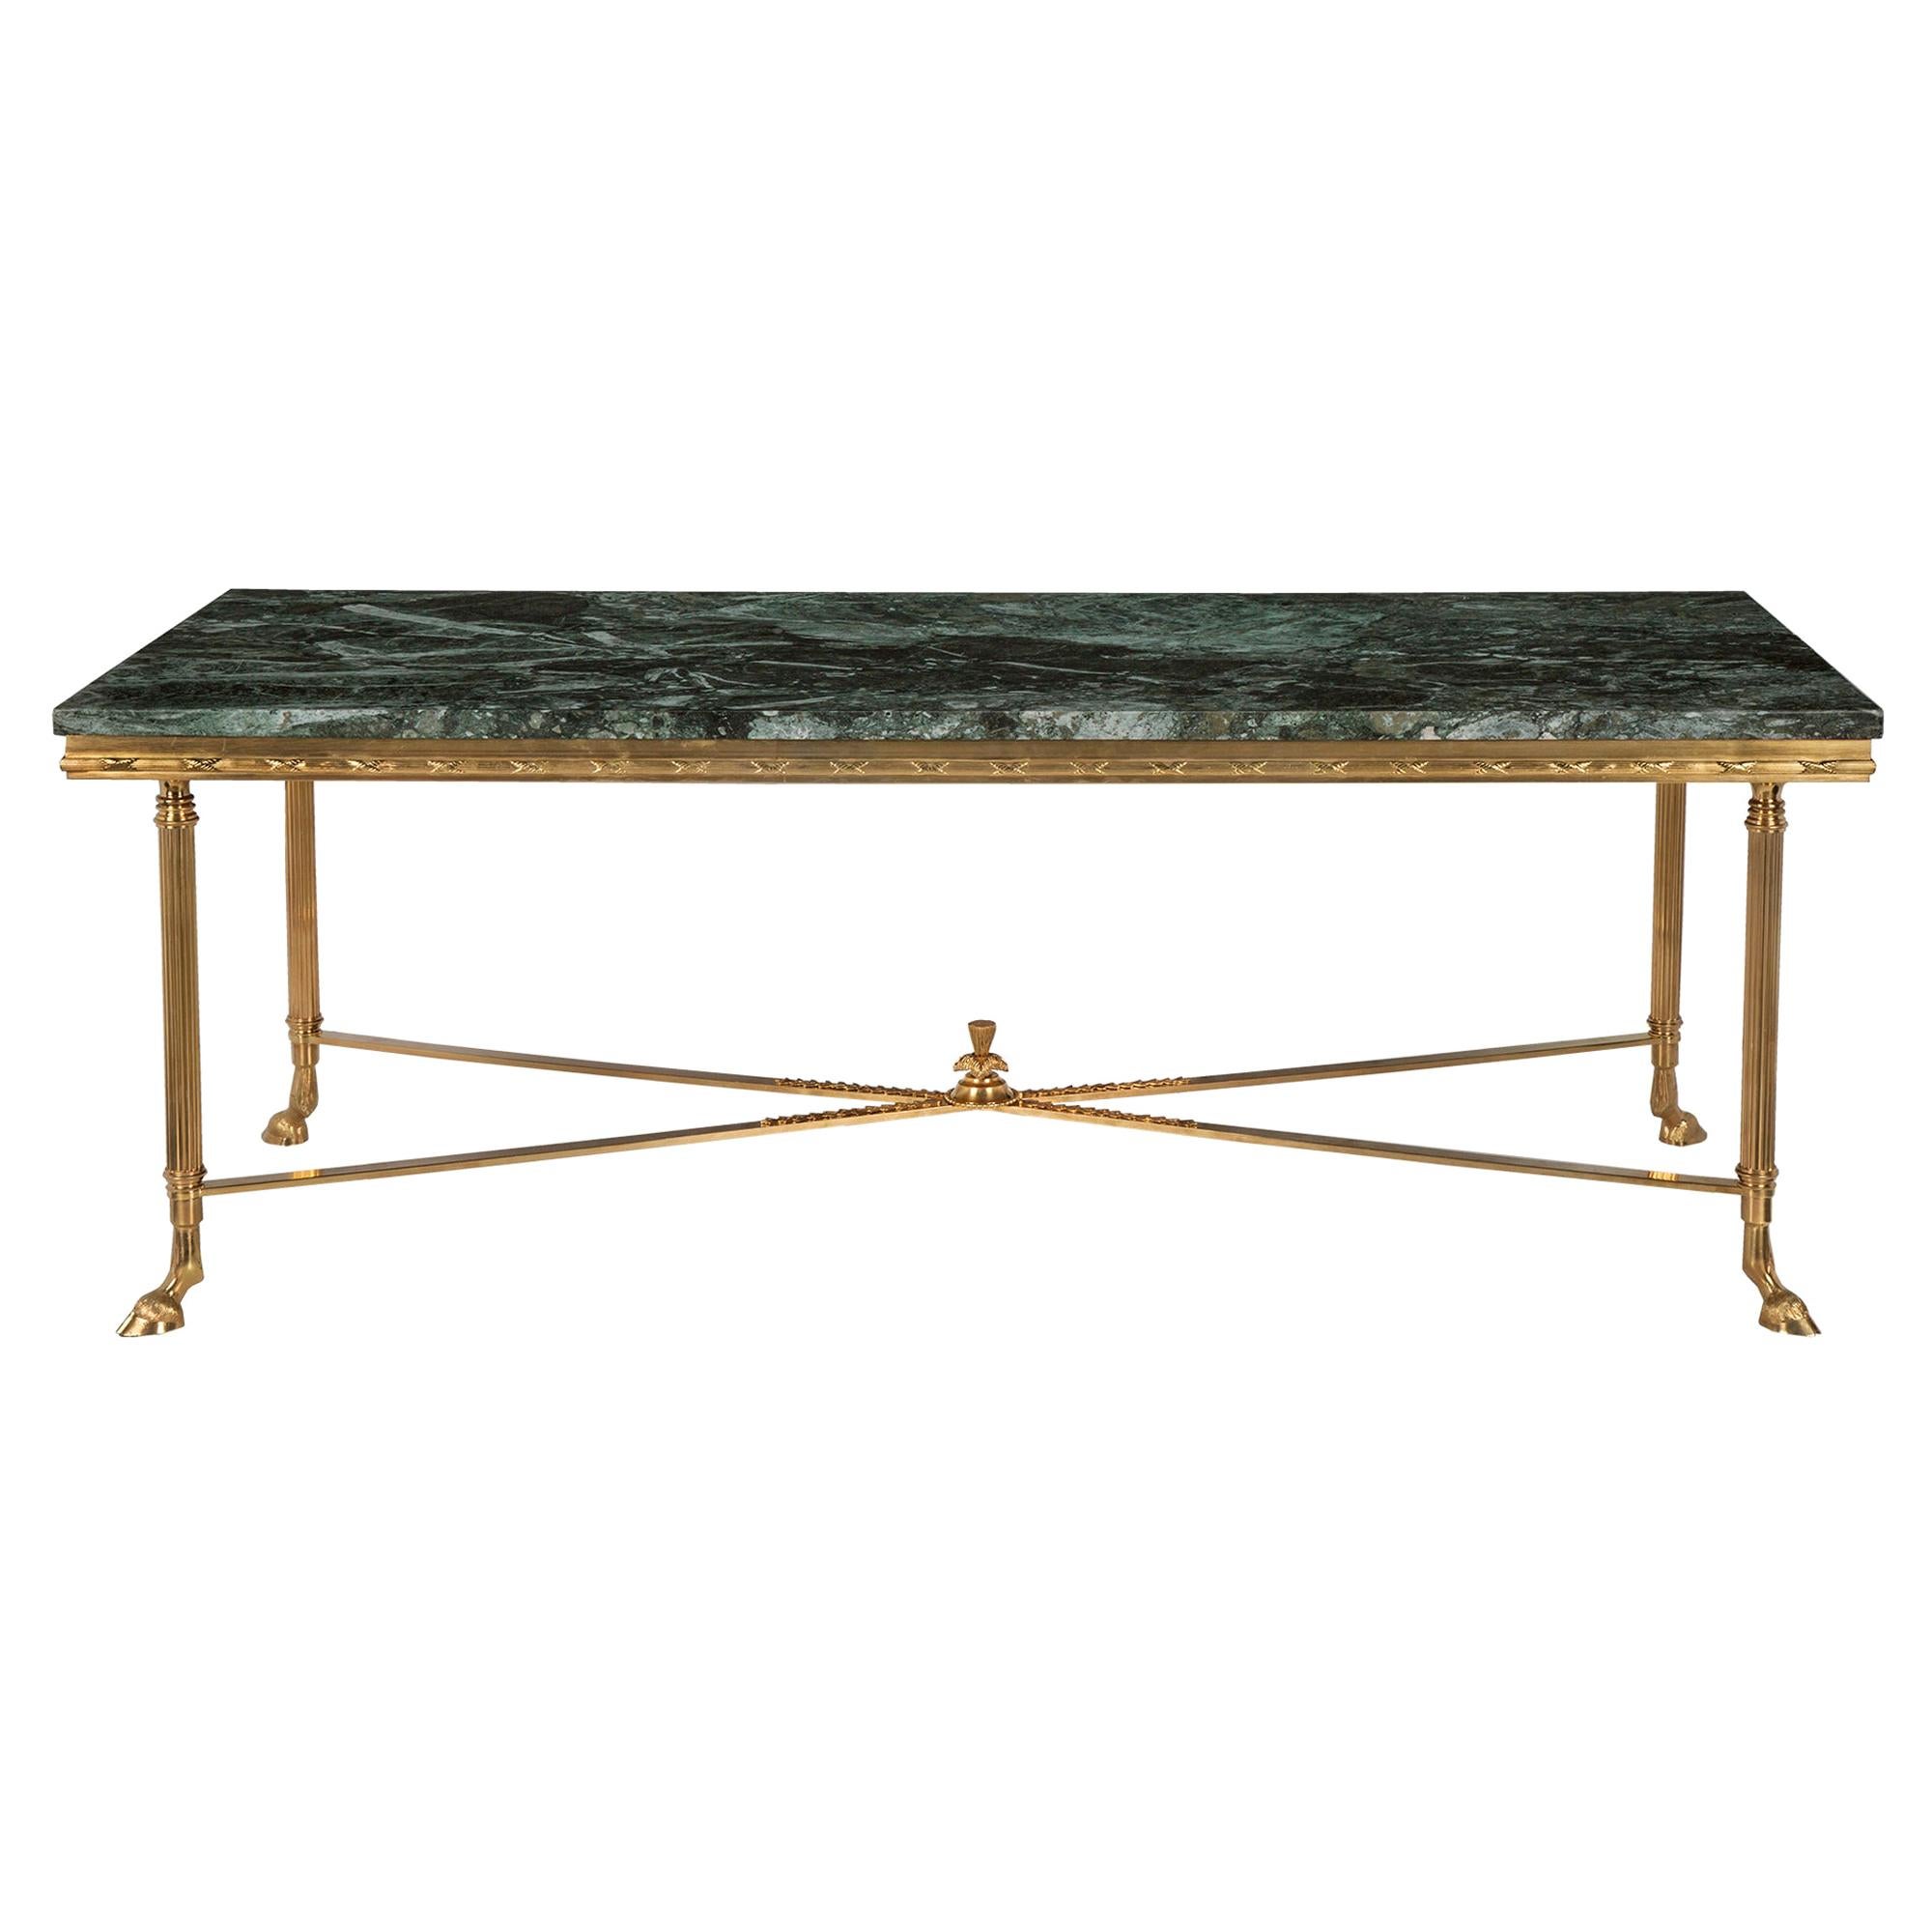 French Turn of the Century Louis XVI Style Ormolu and Marble Coffee Table